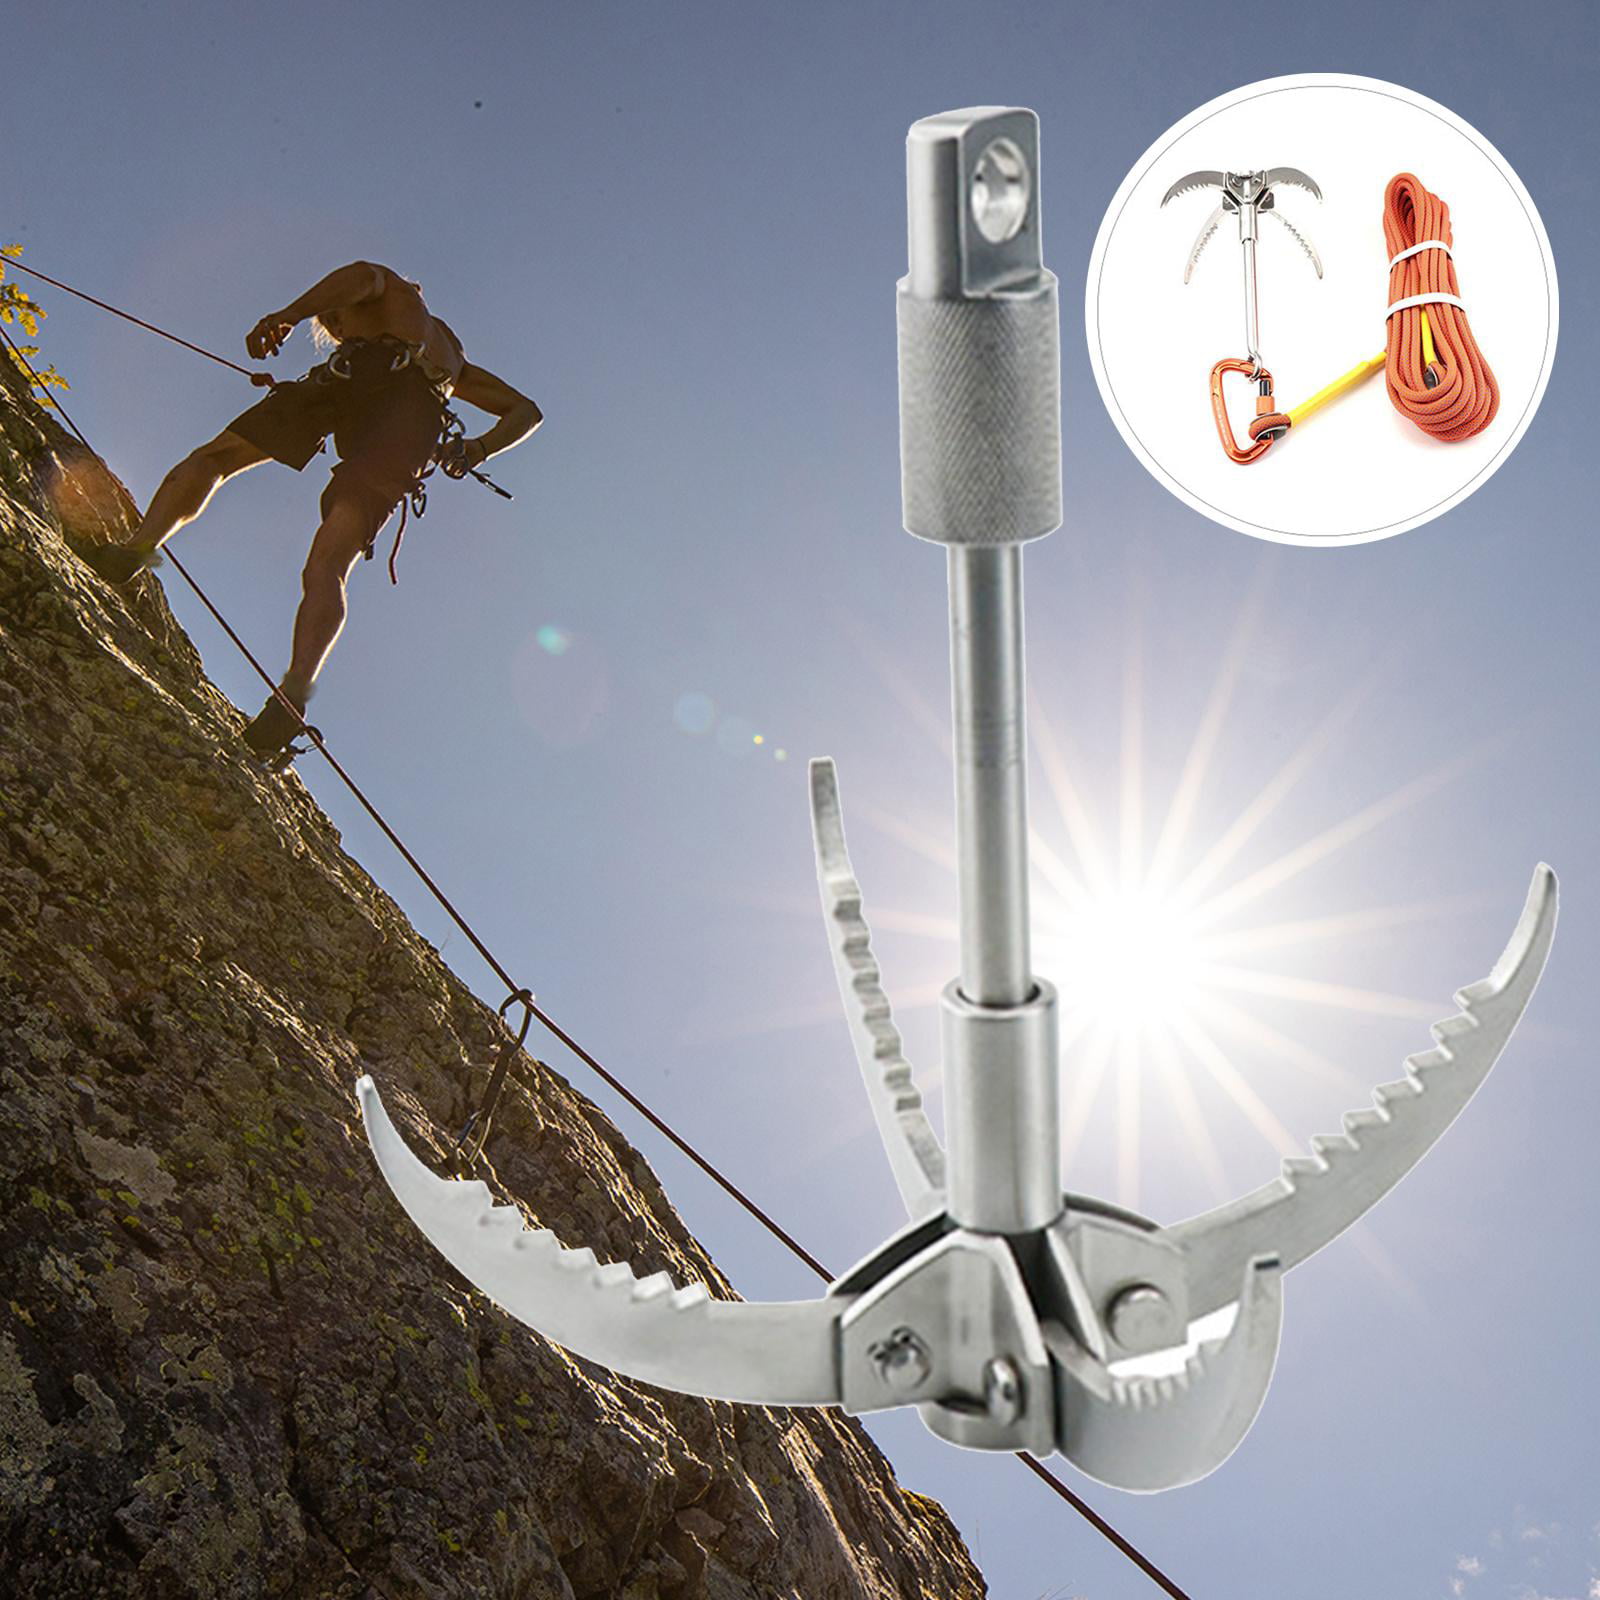  VGEBY Grappling Hook, Small Folding Claw 4 Claw Grappling Hook  Stainless Steel Outdoor Survival Gear for Camping Hiking Tree Rock Mountain  Climbing : Sports & Outdoors